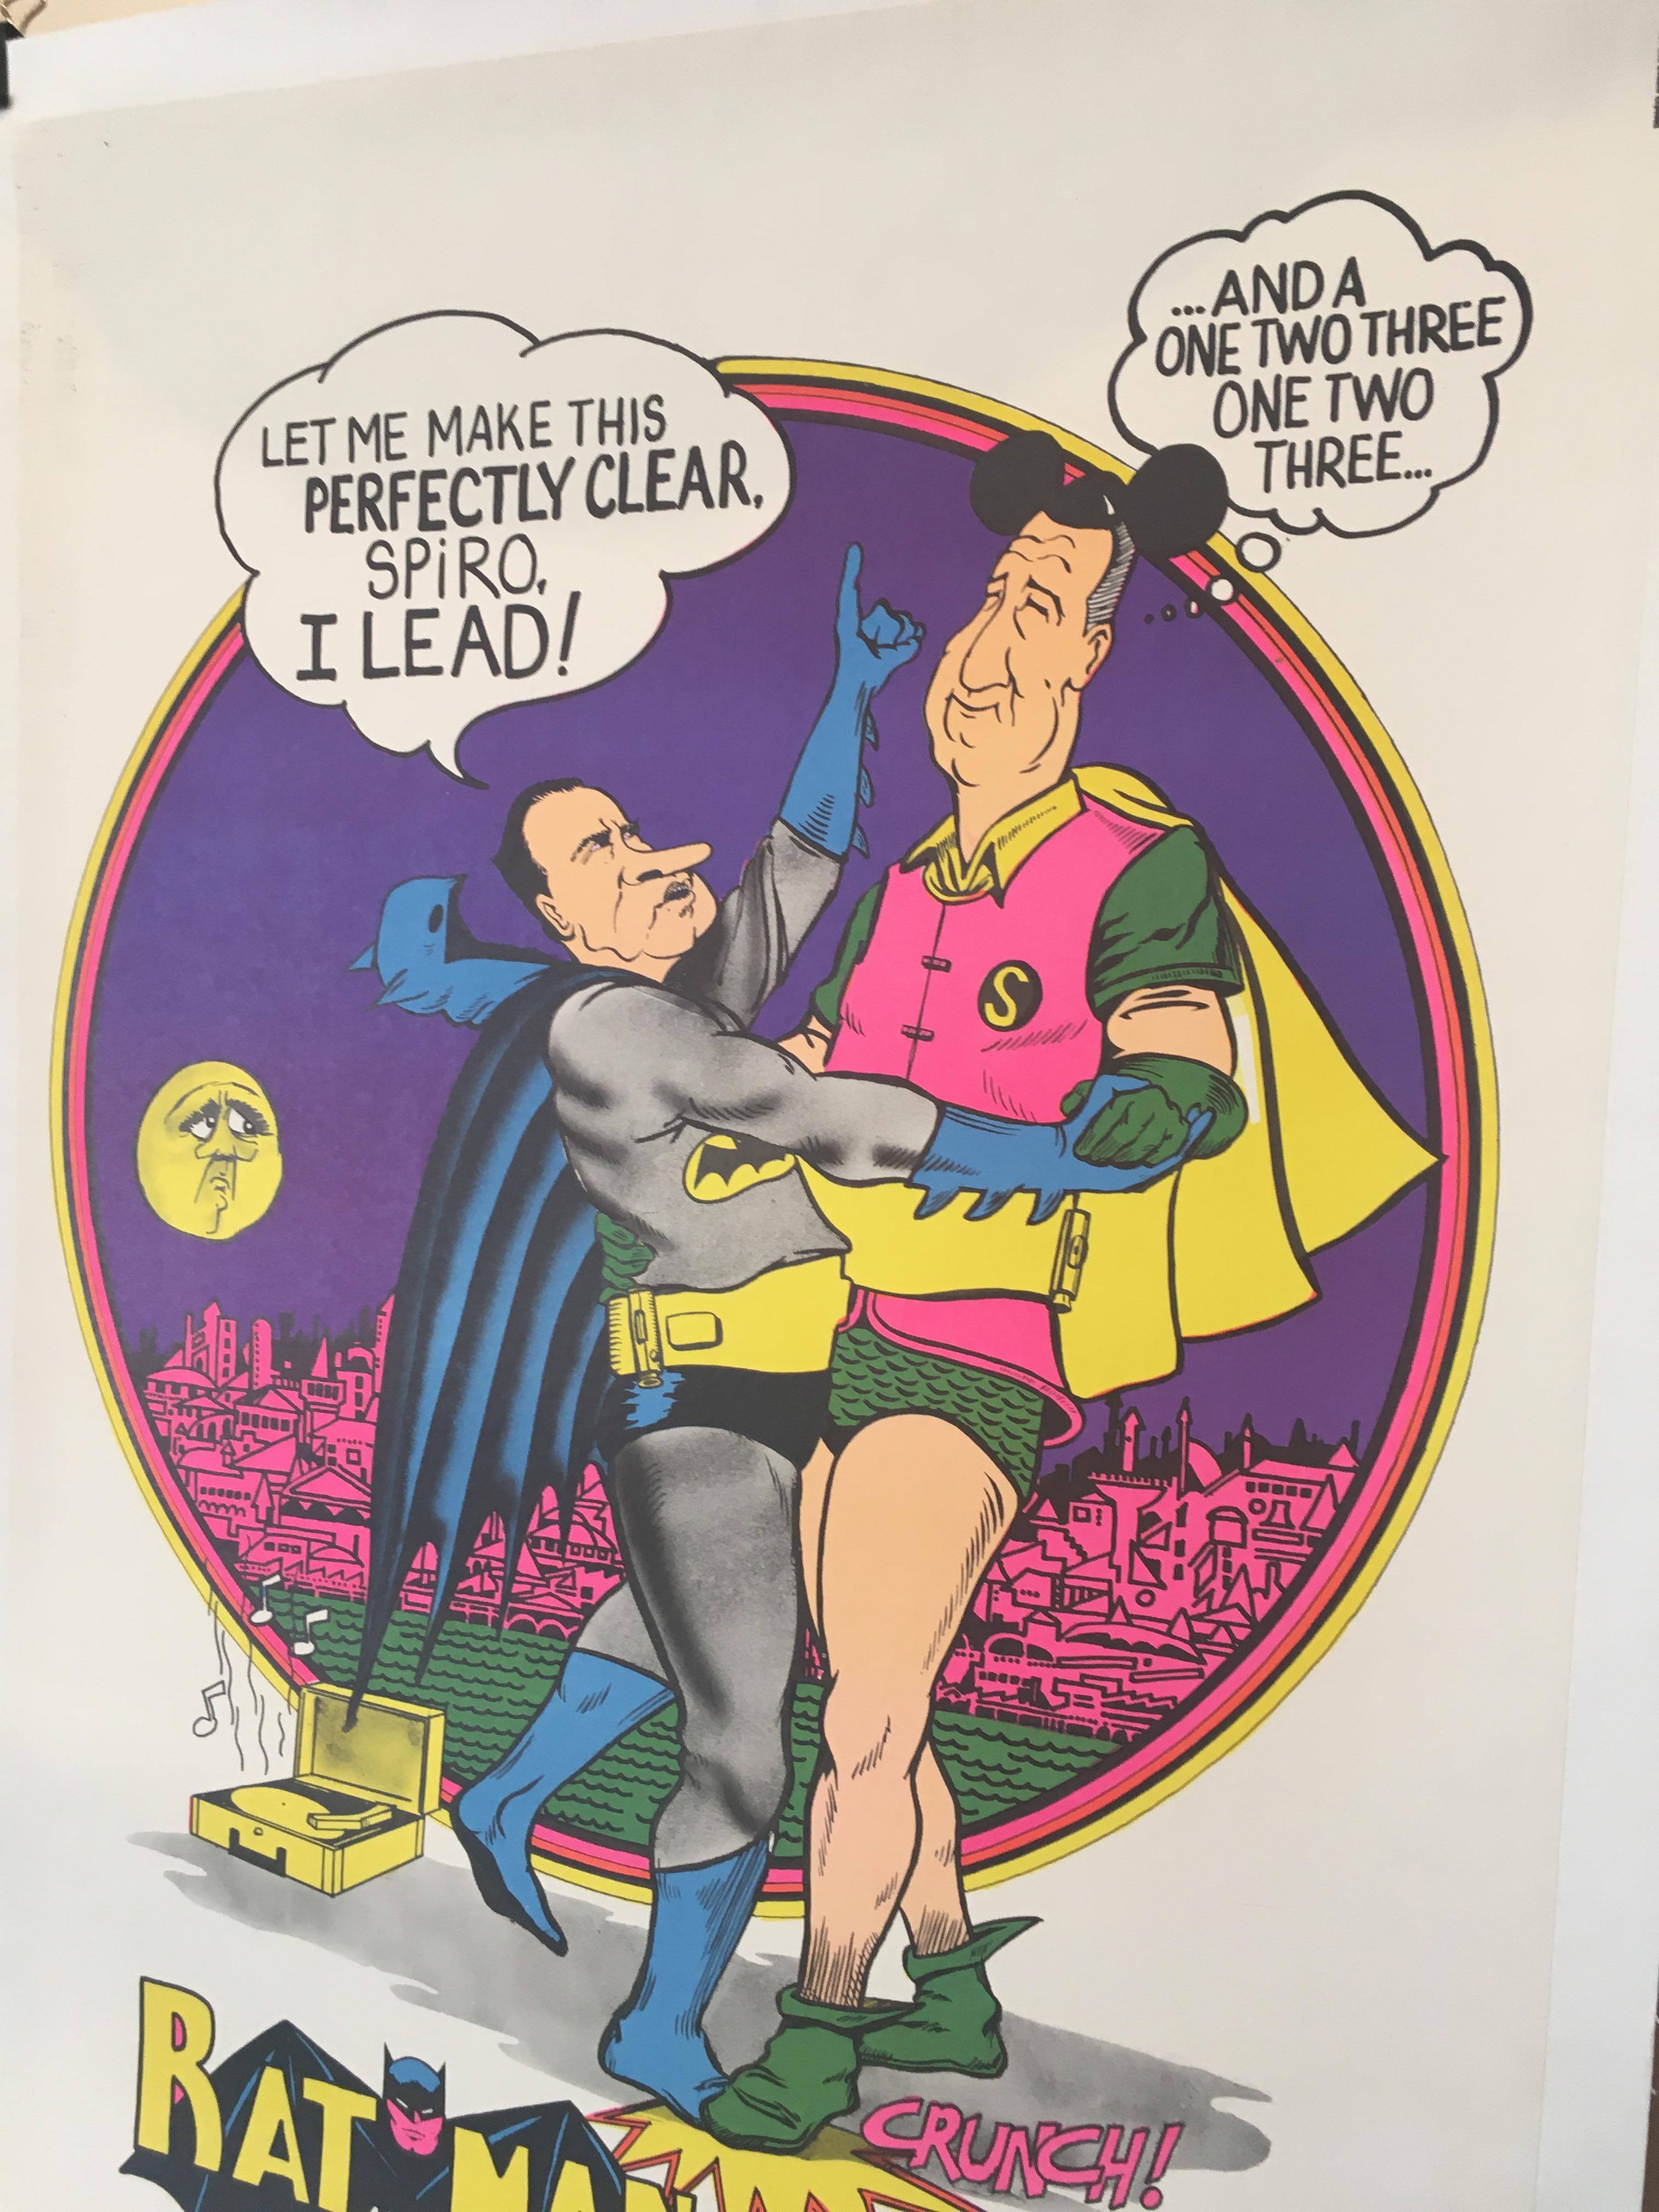 Paper 'Ratman and Boobin Real Identity Exposed' Original Vintage American Poster, 1970